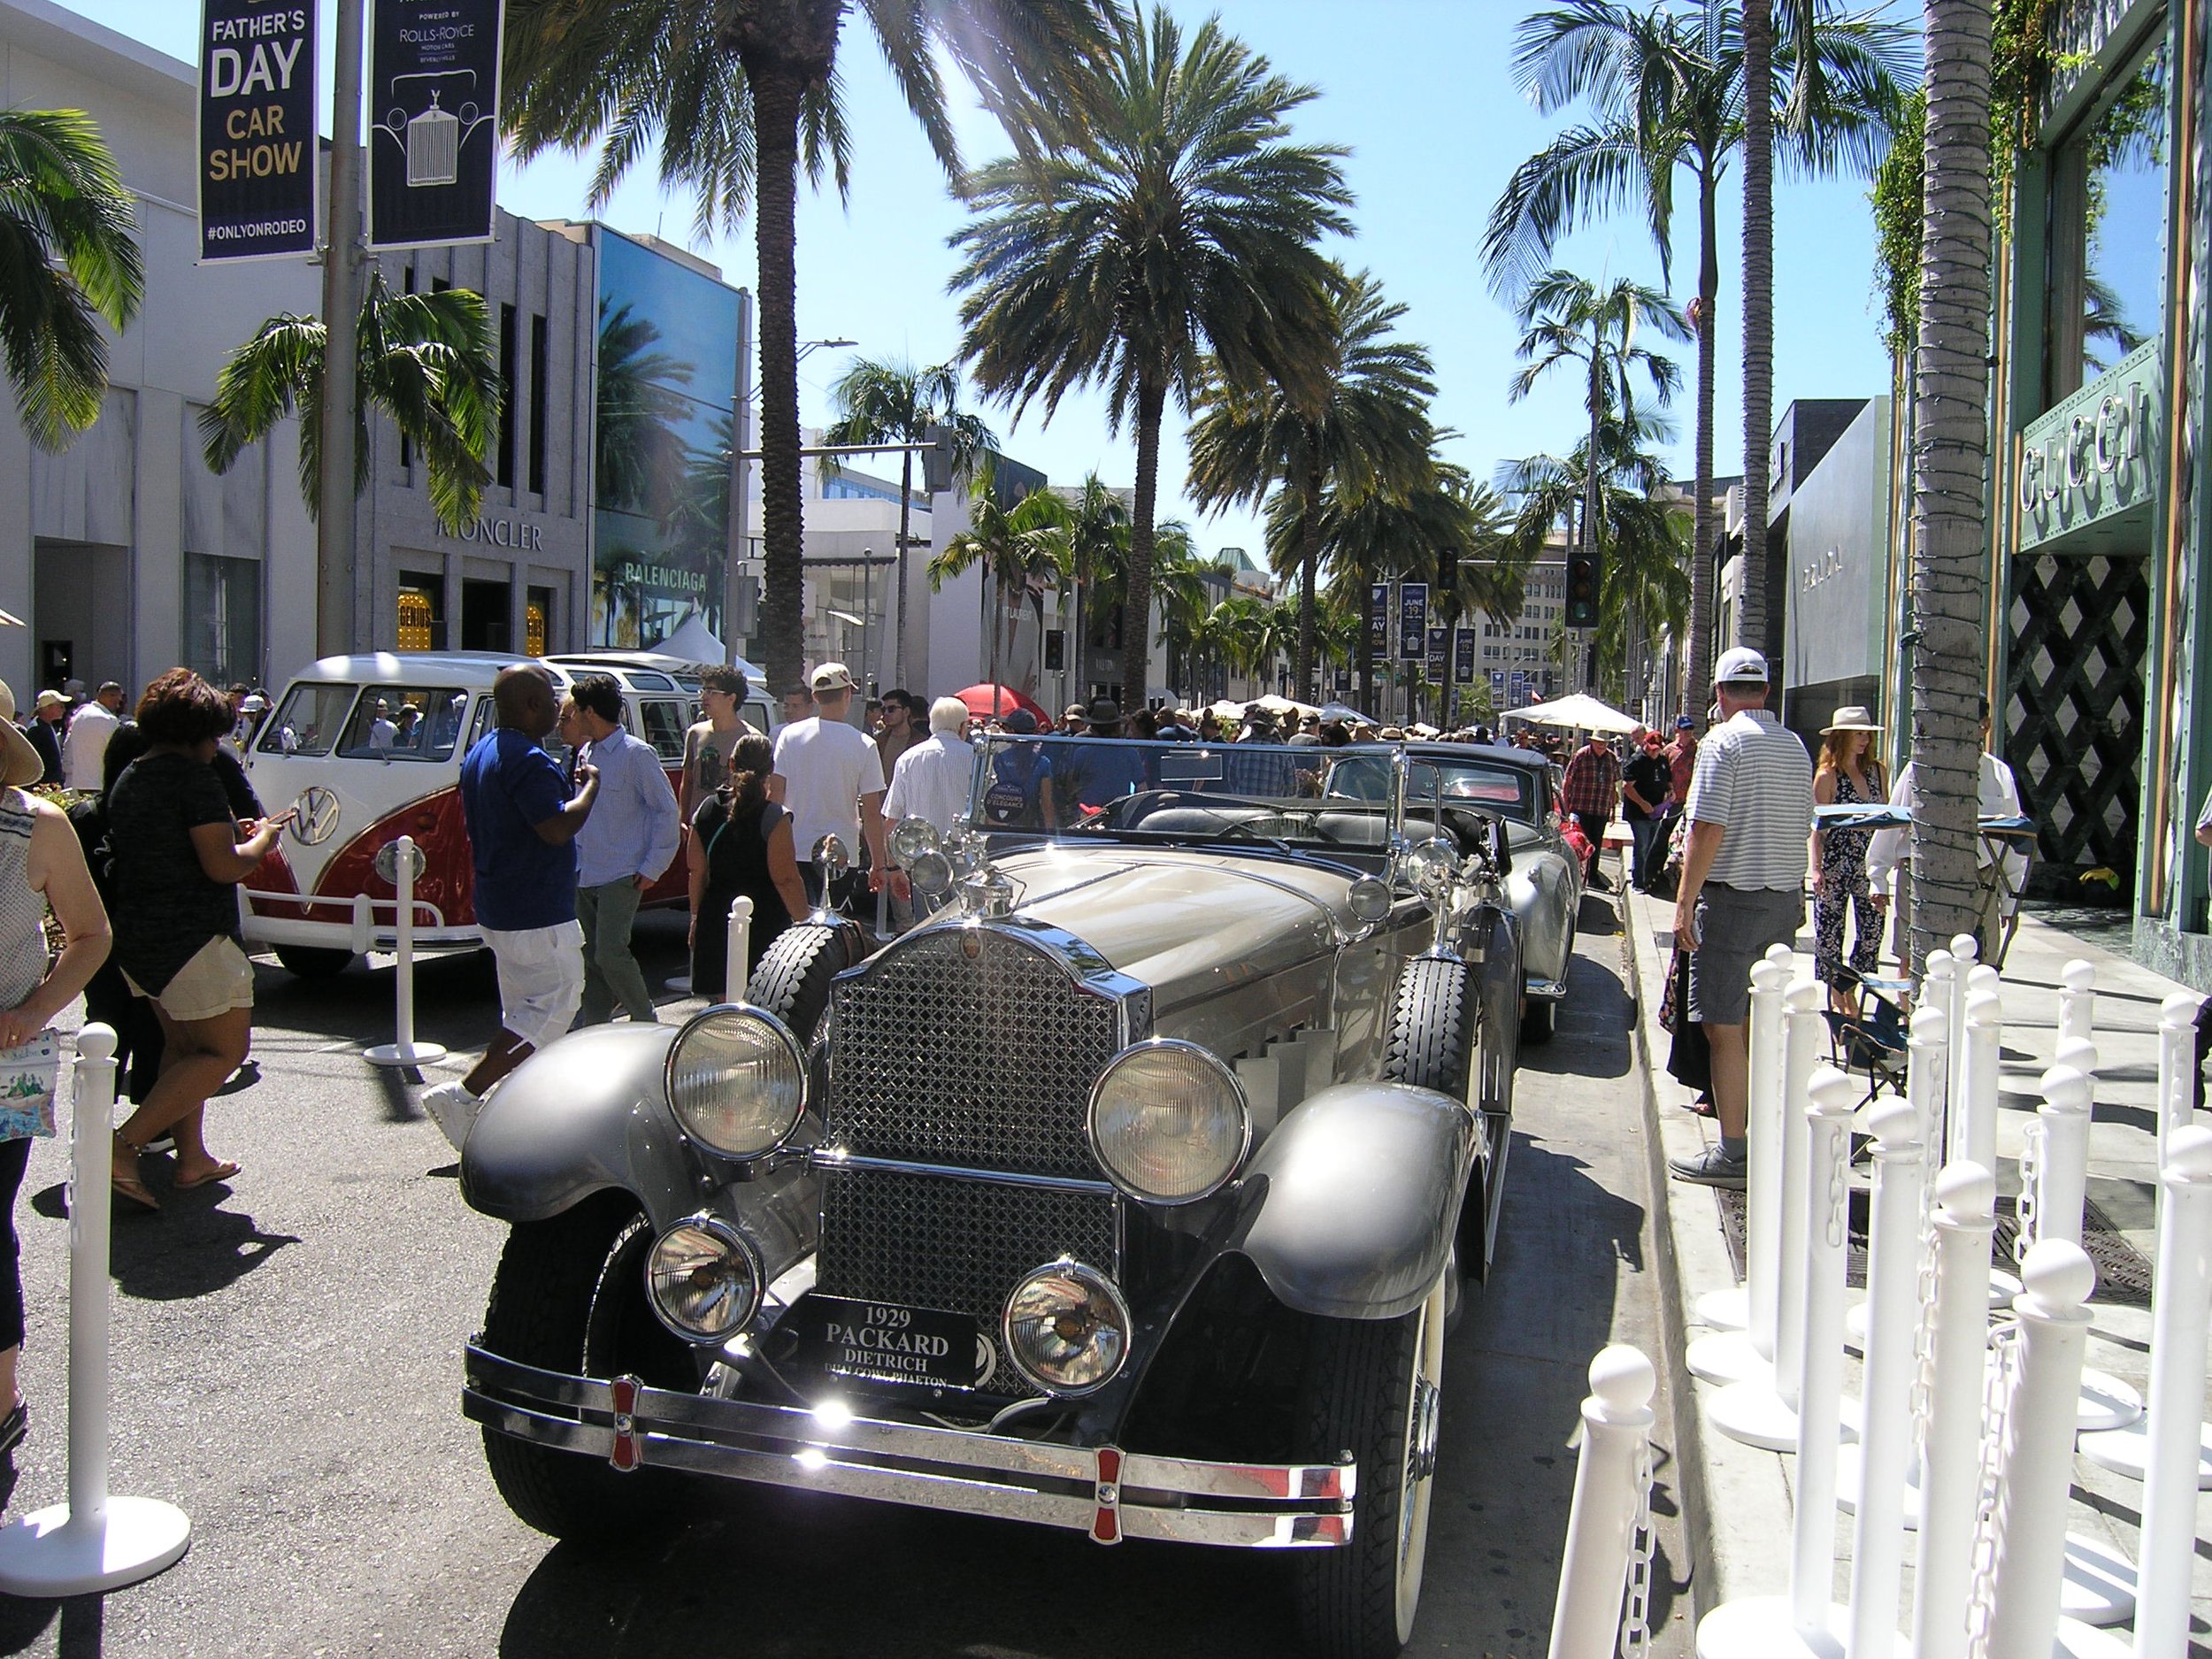 Another street view.  That's our 1929 Packard in front.